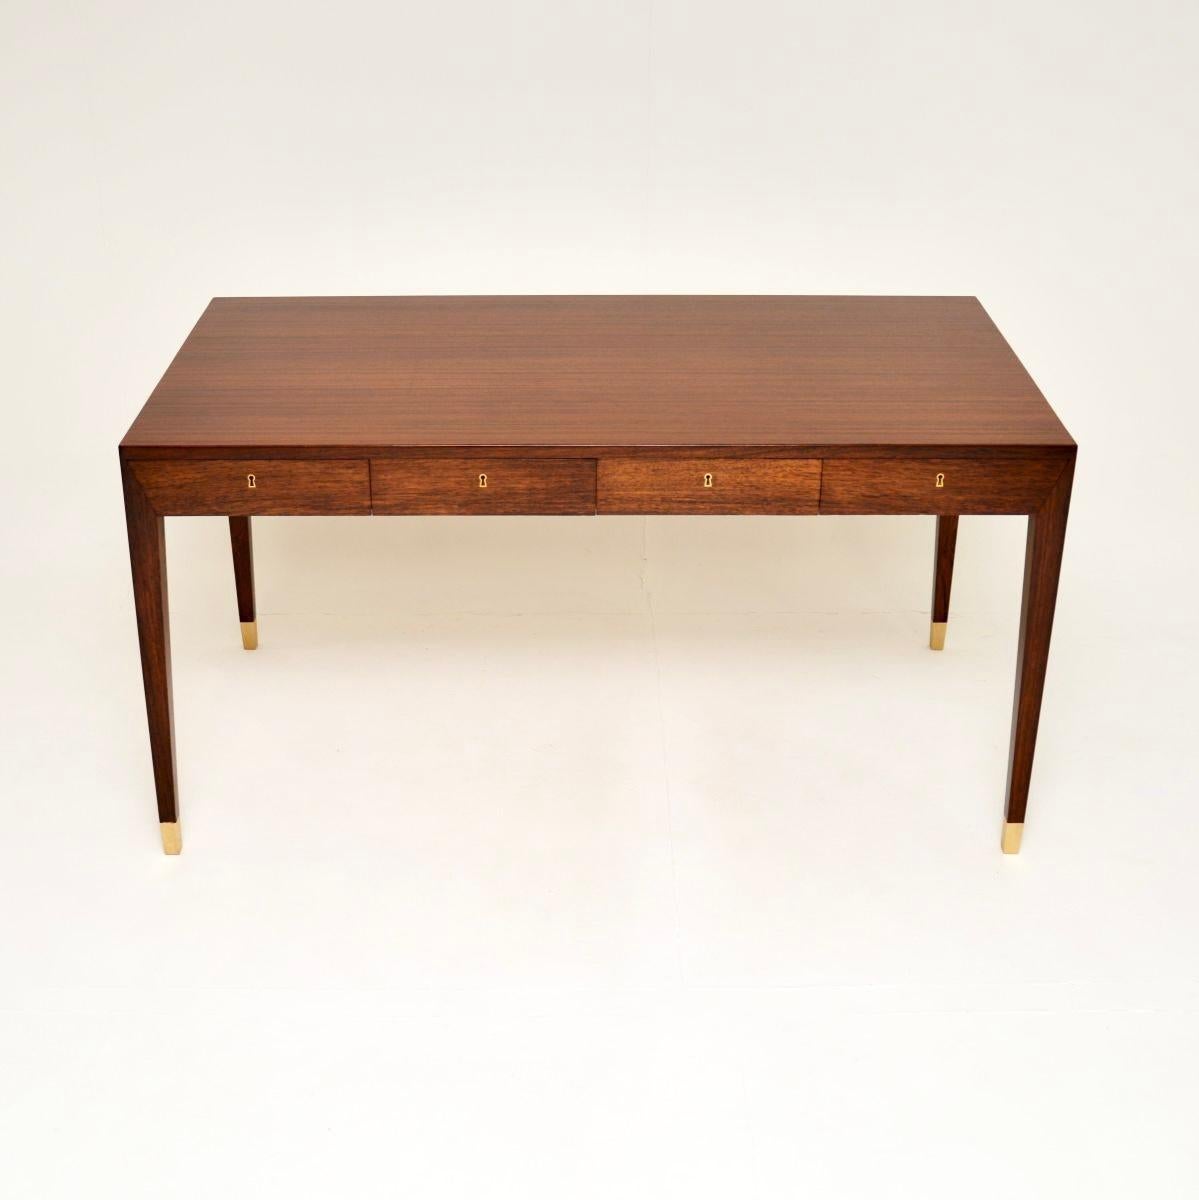 A stylish and iconic Danish vintage desk by Severin Hansen for Haslev. It was made in Denmark, and dates from the 1960’s.

It is of outstanding quality and has a beautiful design. The wood has a gorgeous colour tone and wonderful grain patterns, the